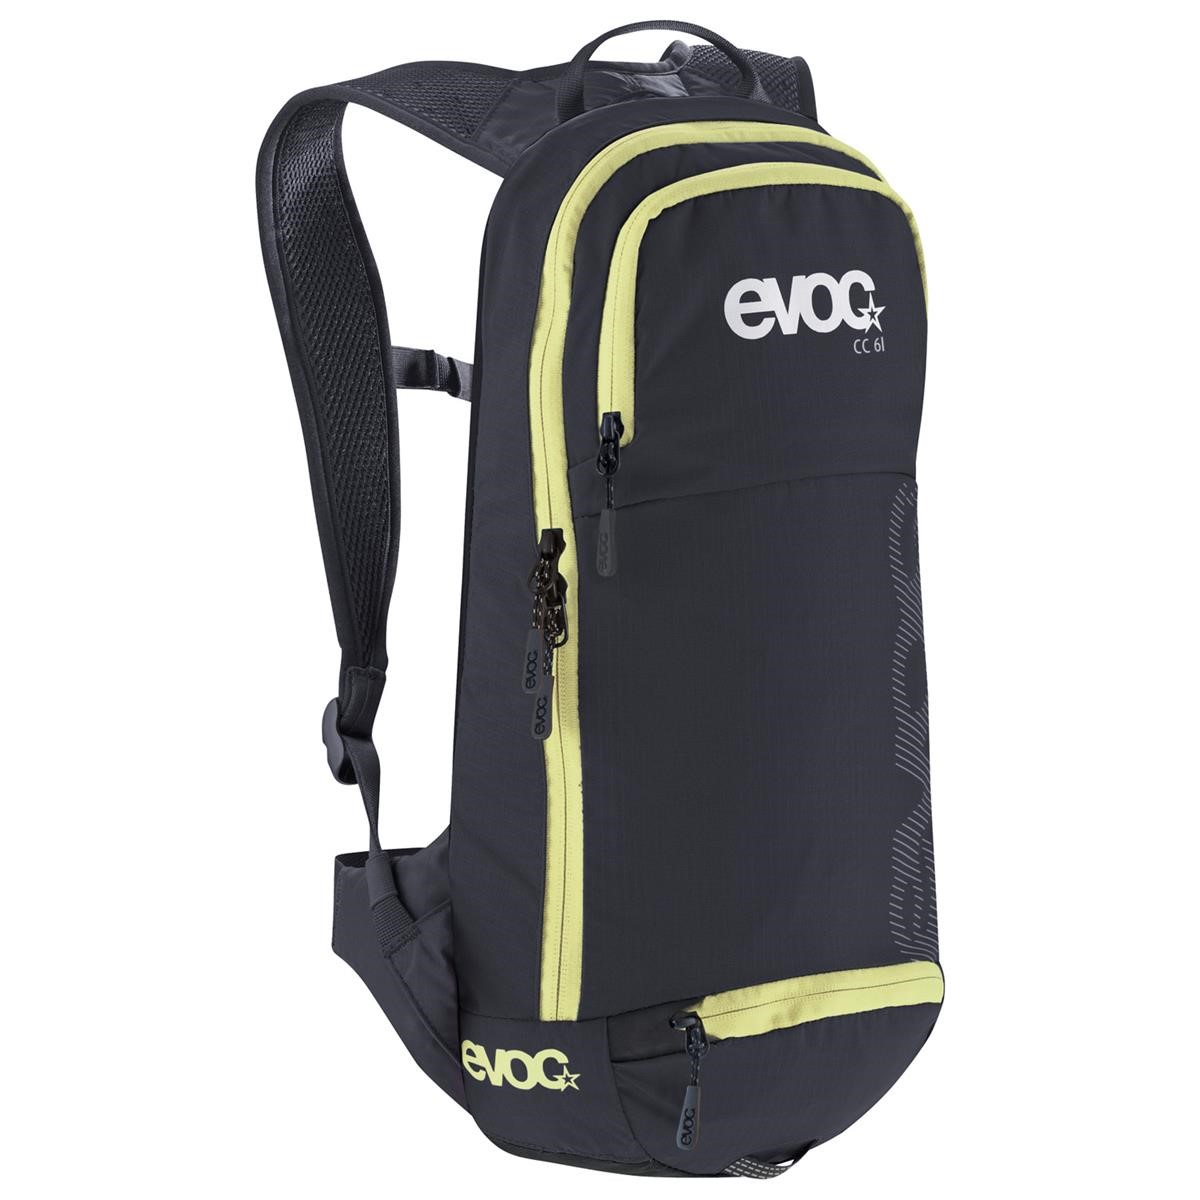 Evoc Backpack with Hydration System Cross Country Black, 6 Liter